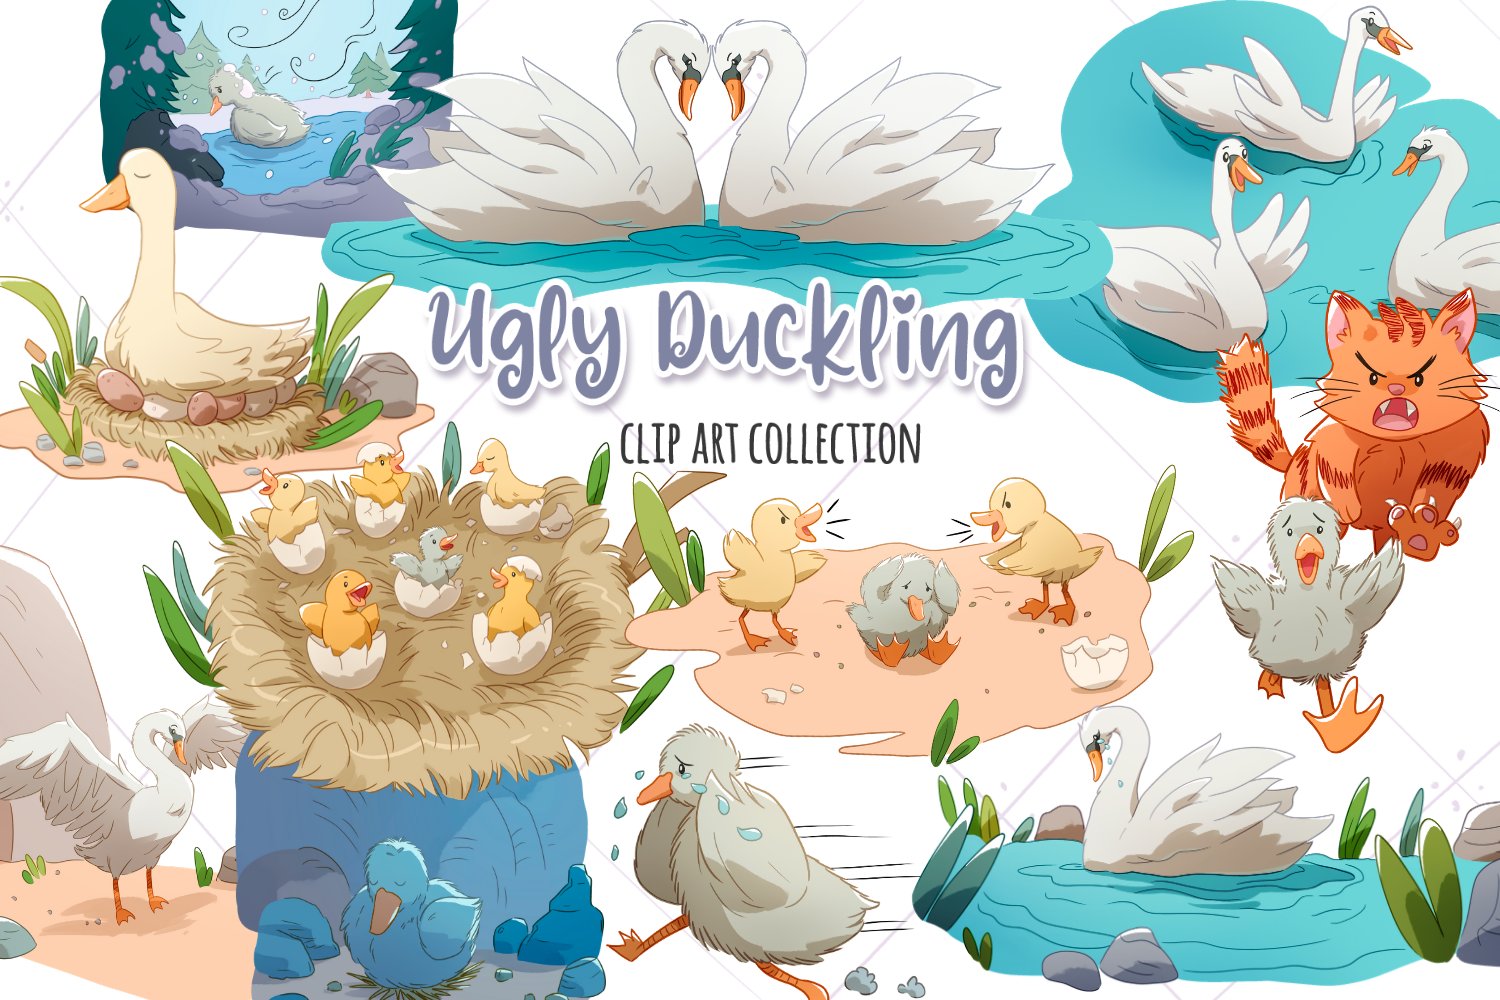 Ugly Duckling Clip Art Collection cover image.